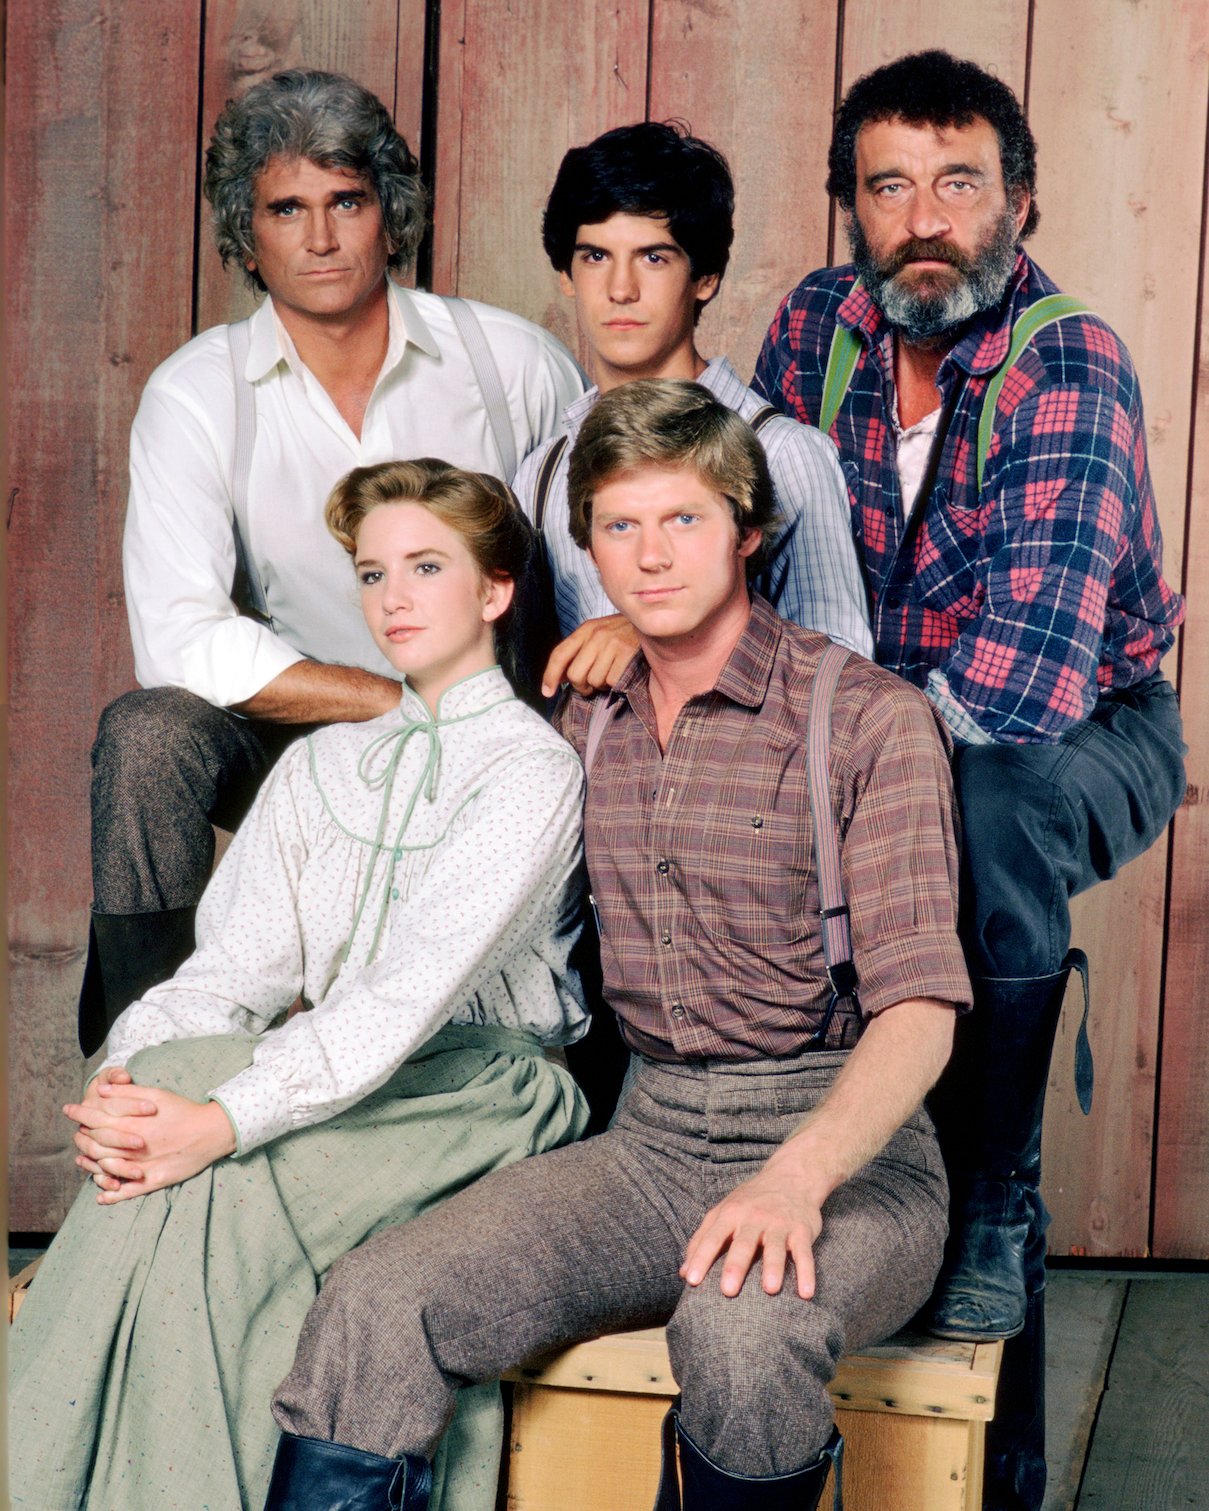 The 4 Worst Episodes of 'Little House on the Prairie', According To IMDb